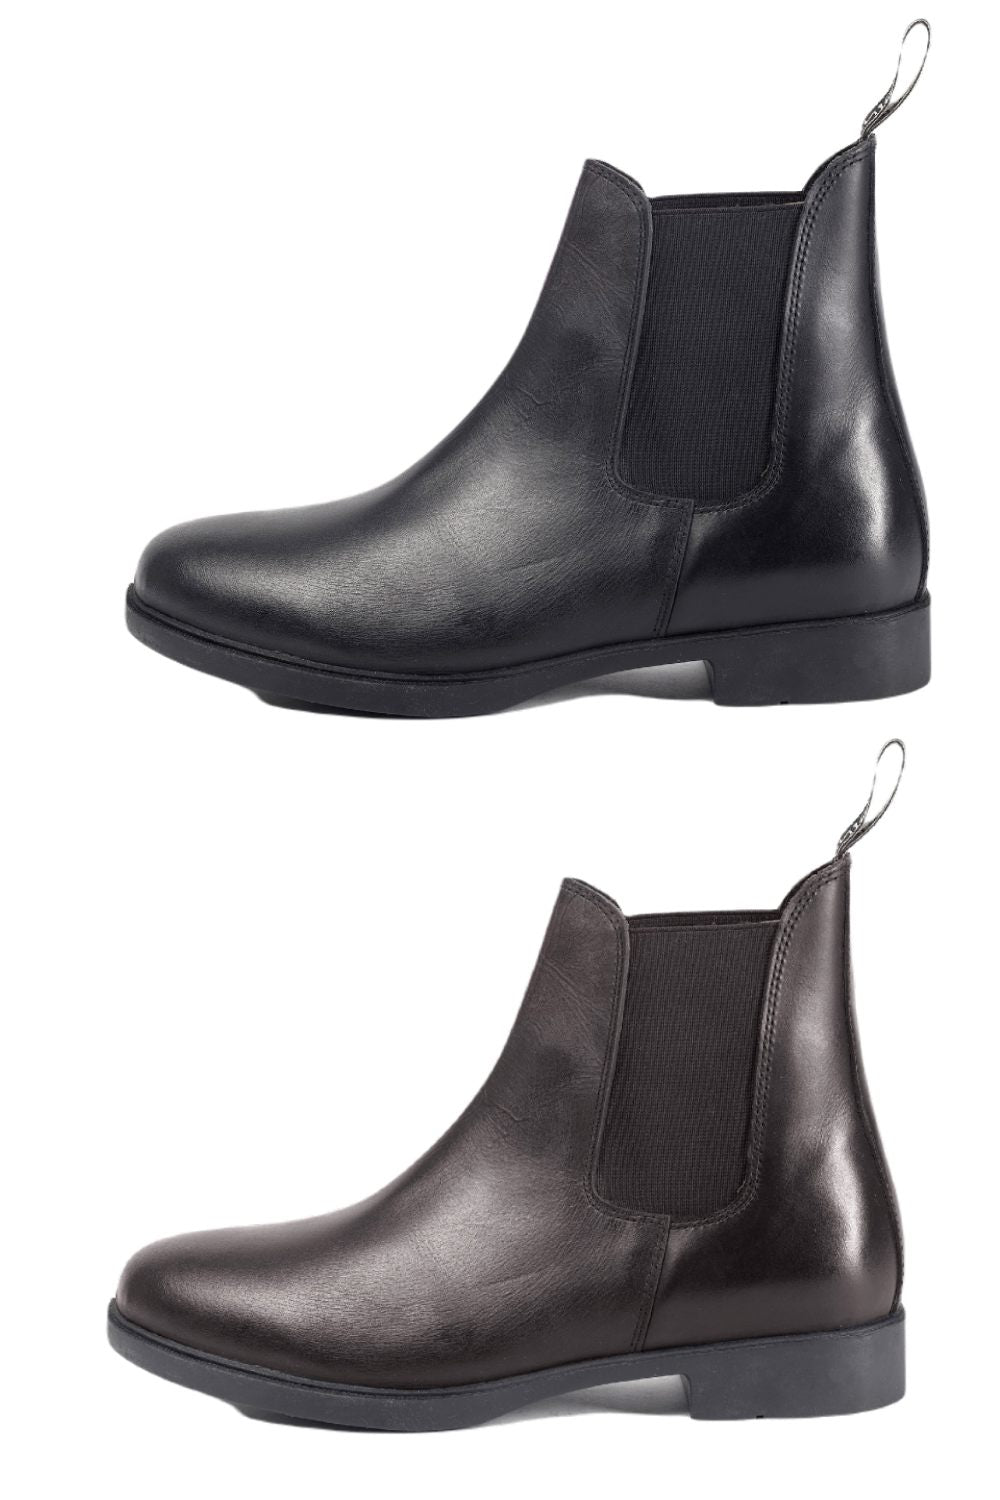 Brogini Pavia Pull On Leather Boots in Black and Brown 